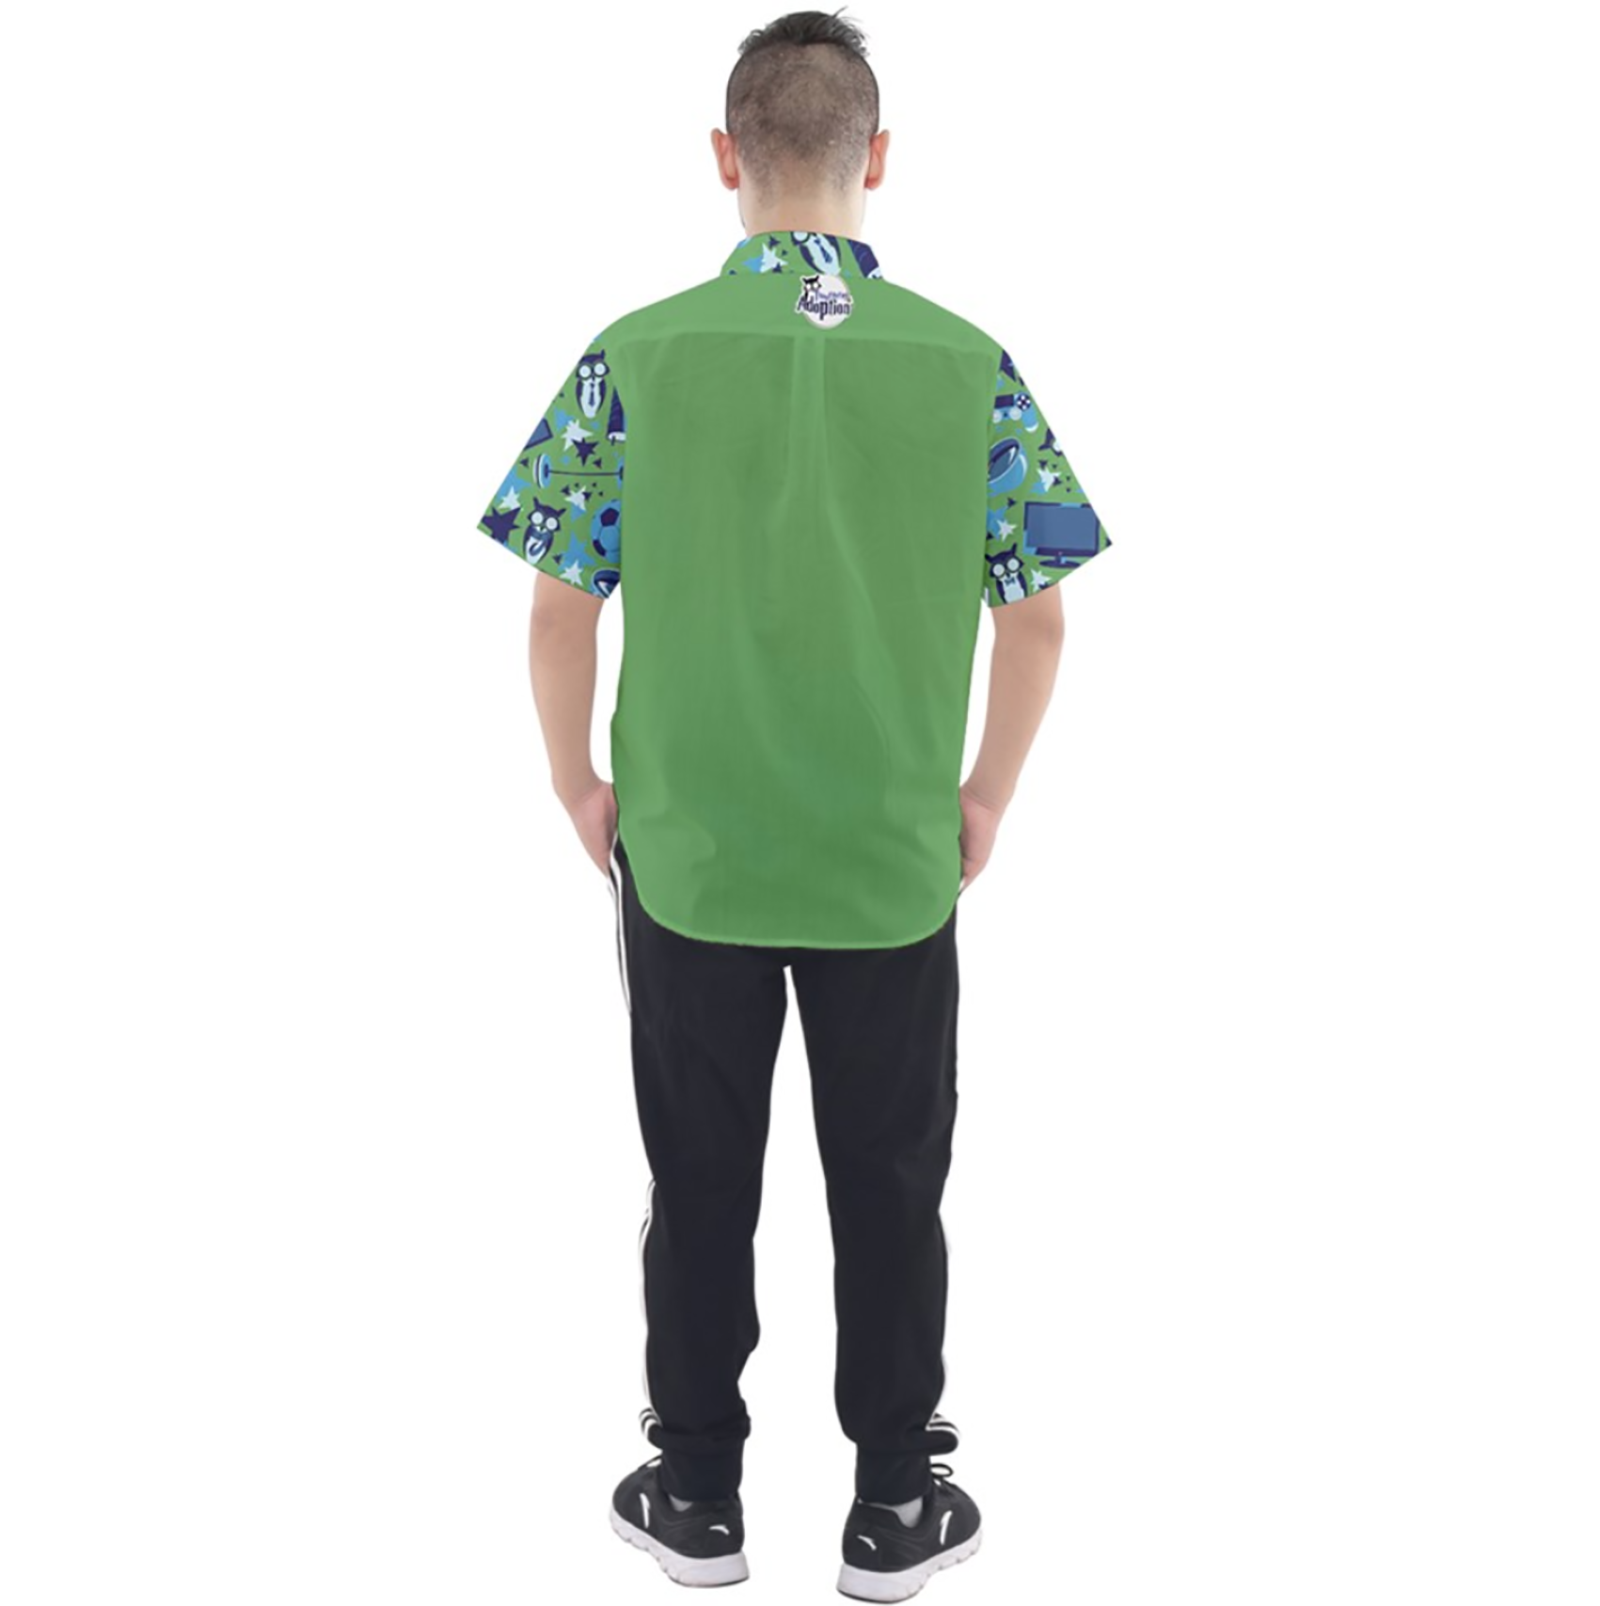 Self-Care Men's Button Up Short Sleeve Shirt (Green Solid Background)